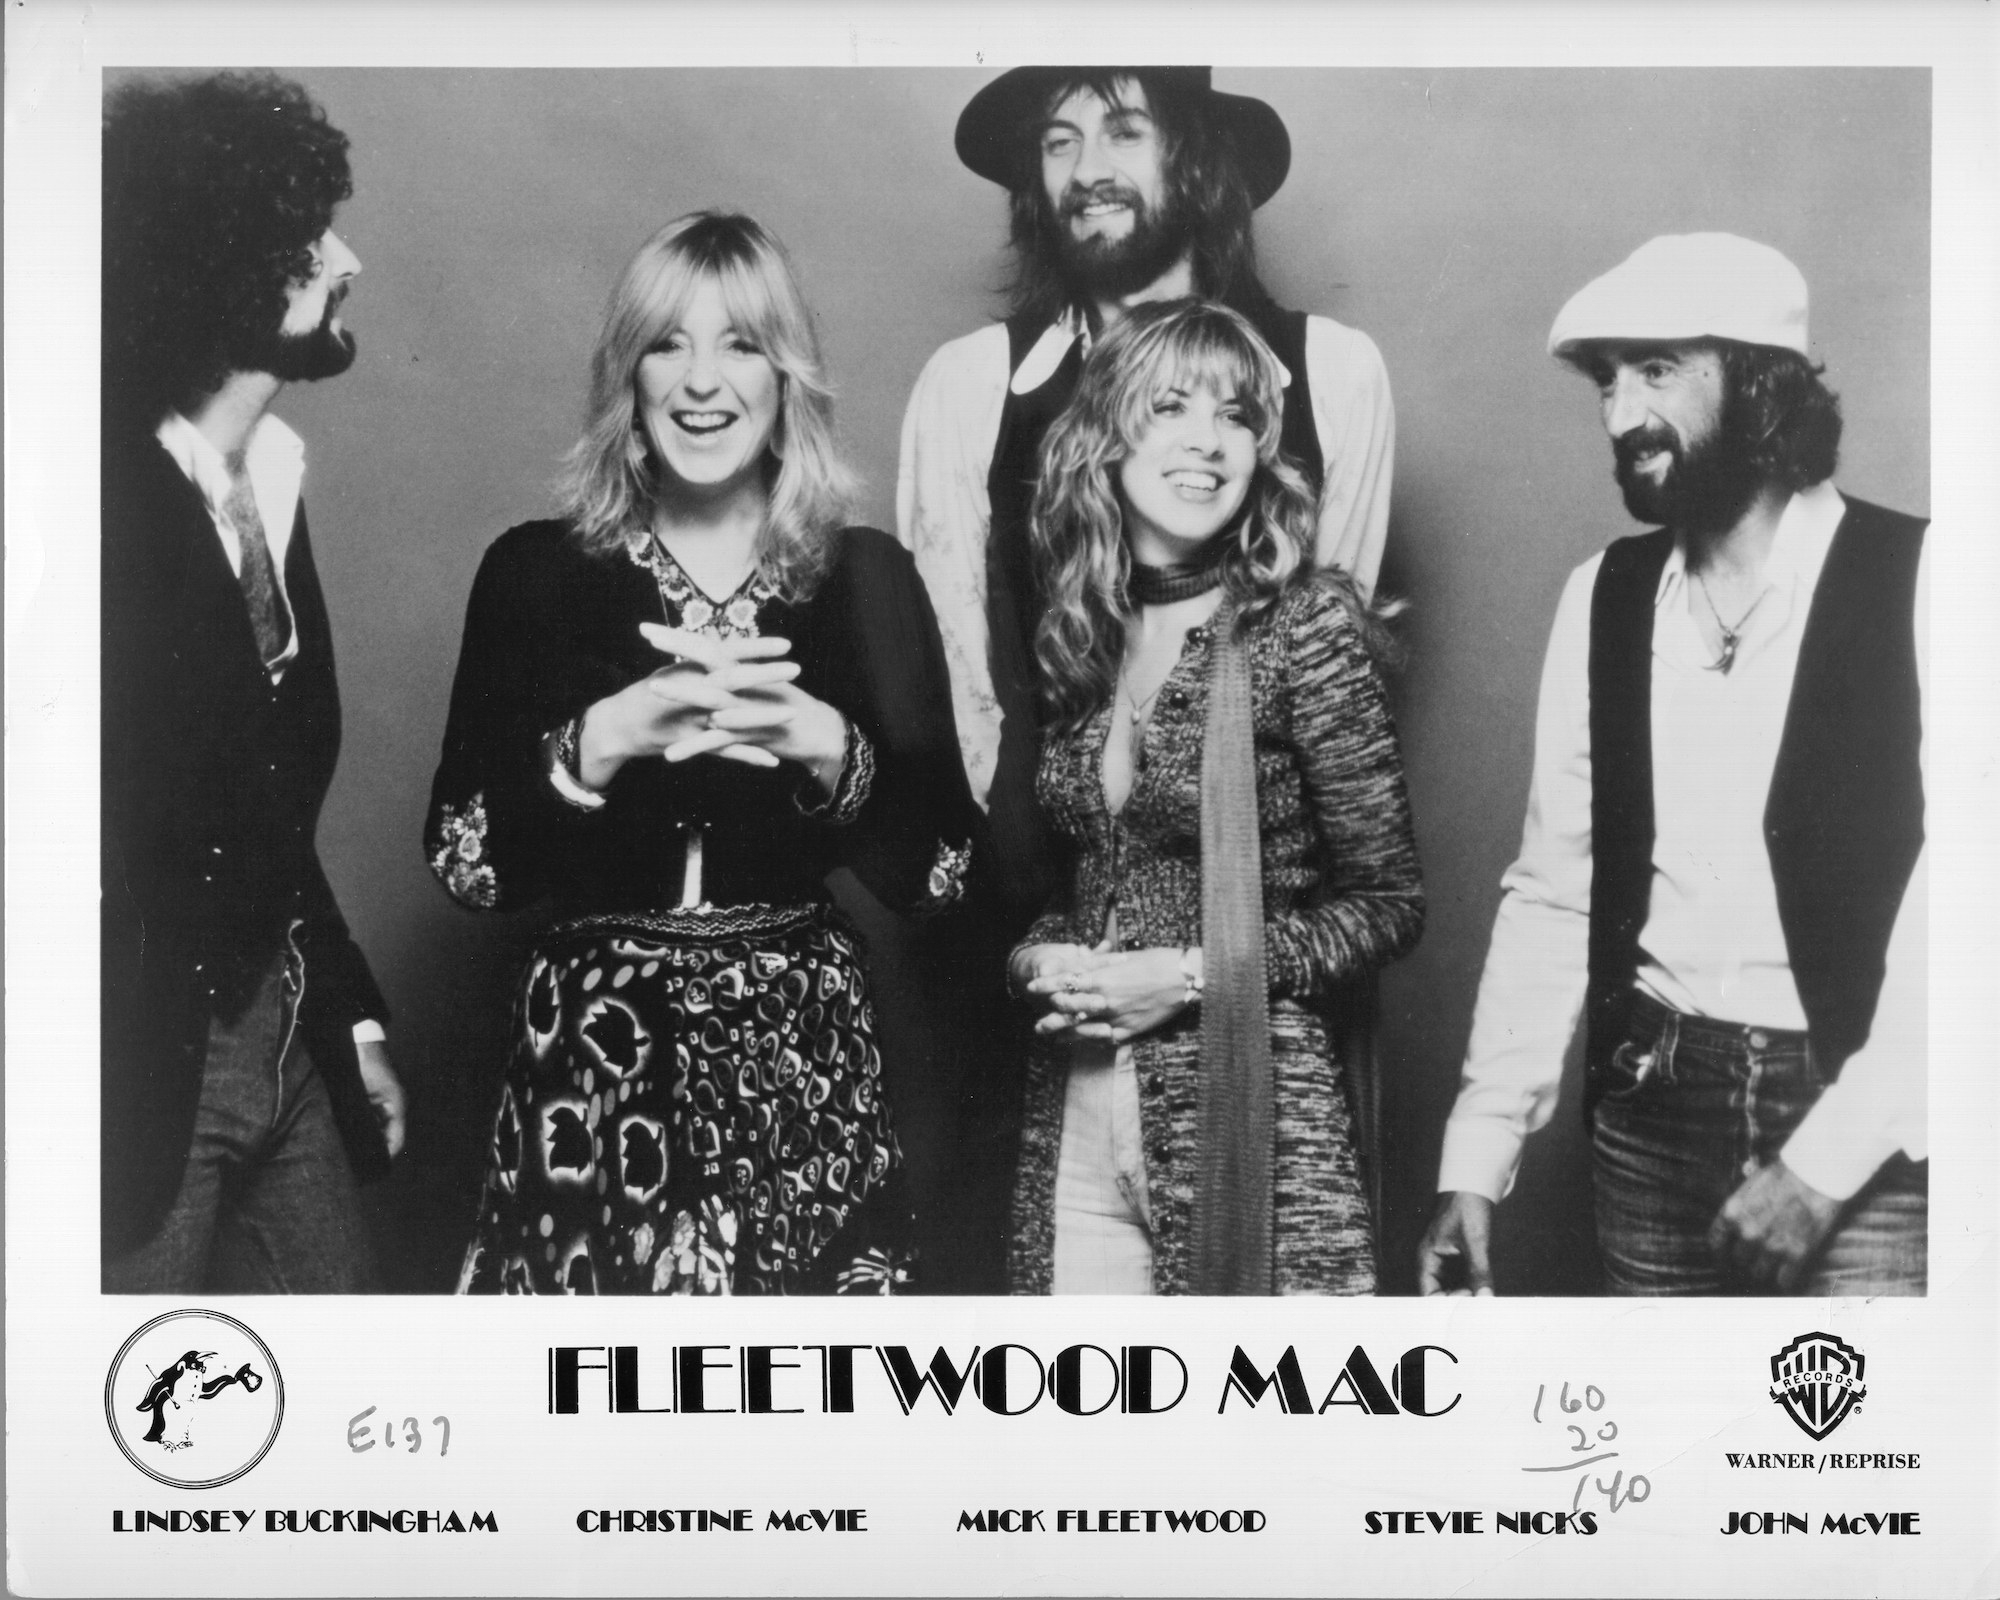 youtube video for straight back by fleetwood mac